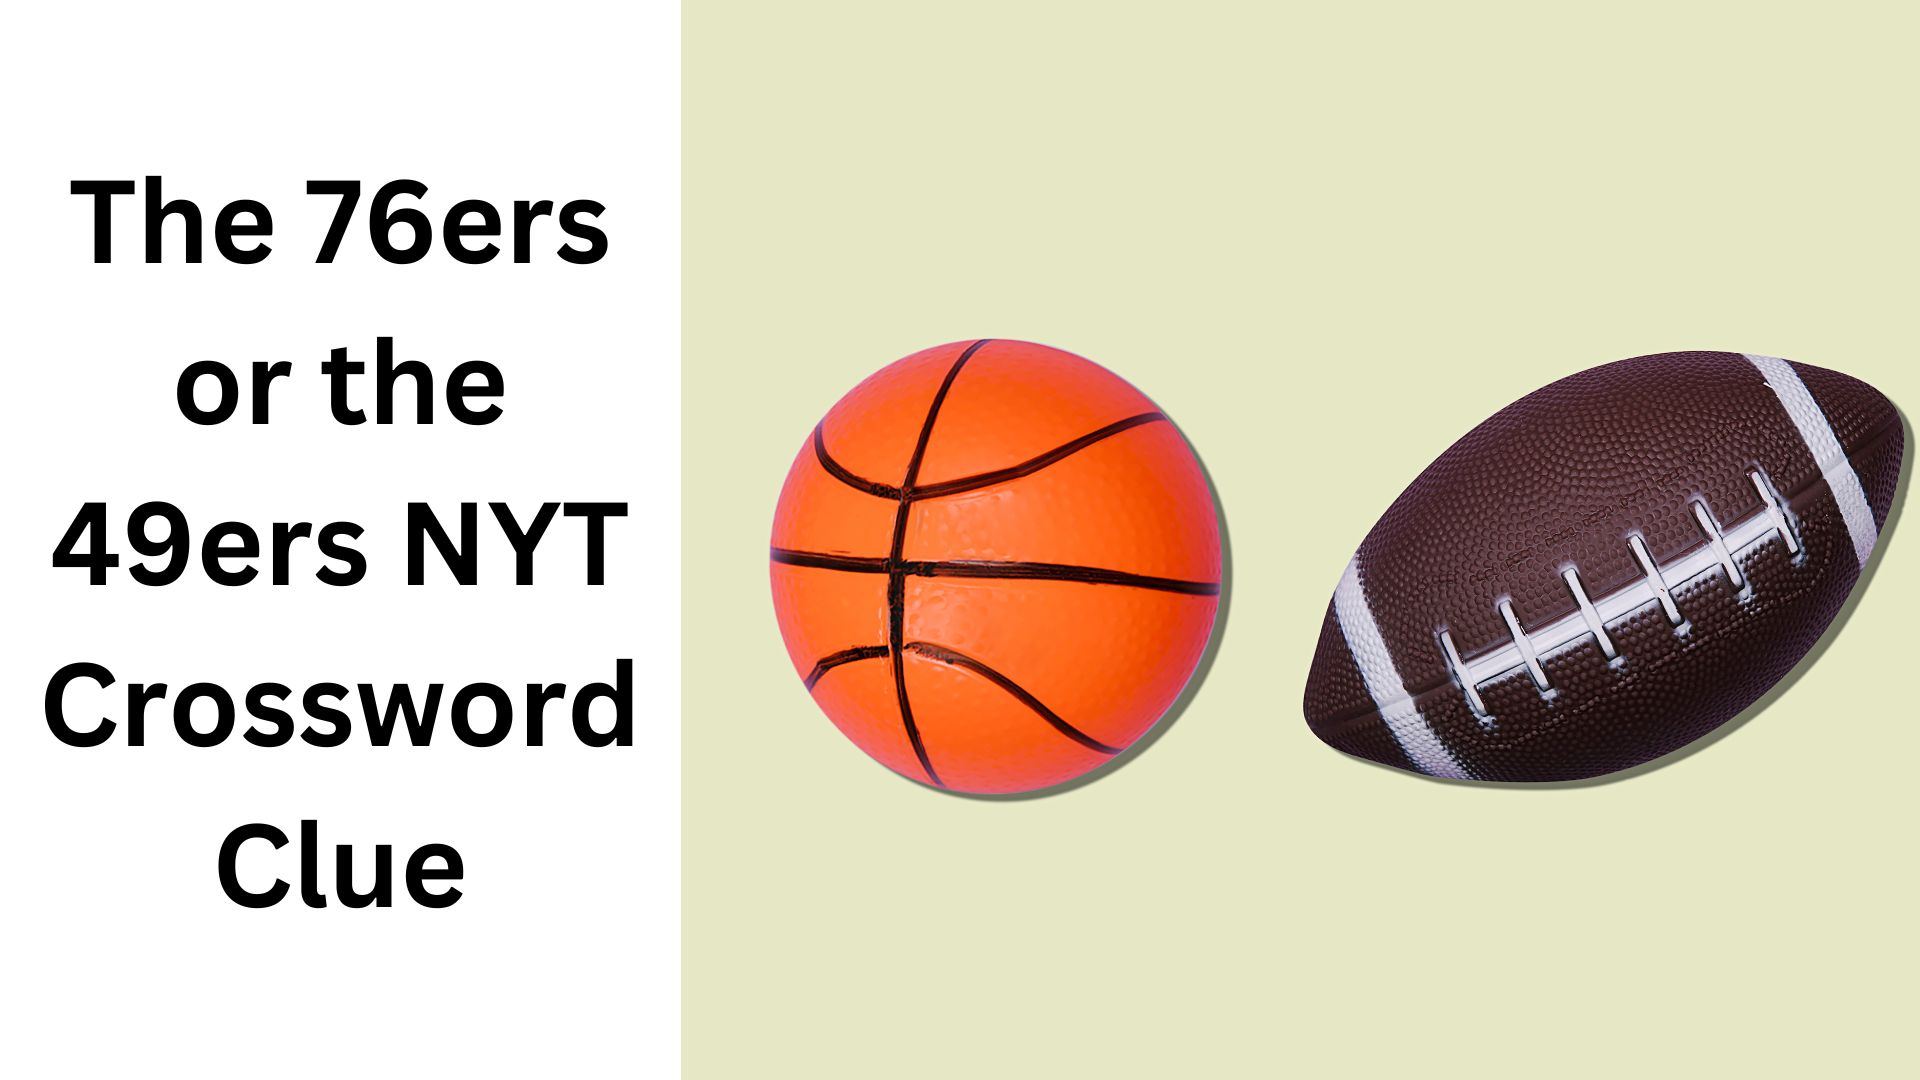 The 76ers or the 49ers NYT Crossword Clue